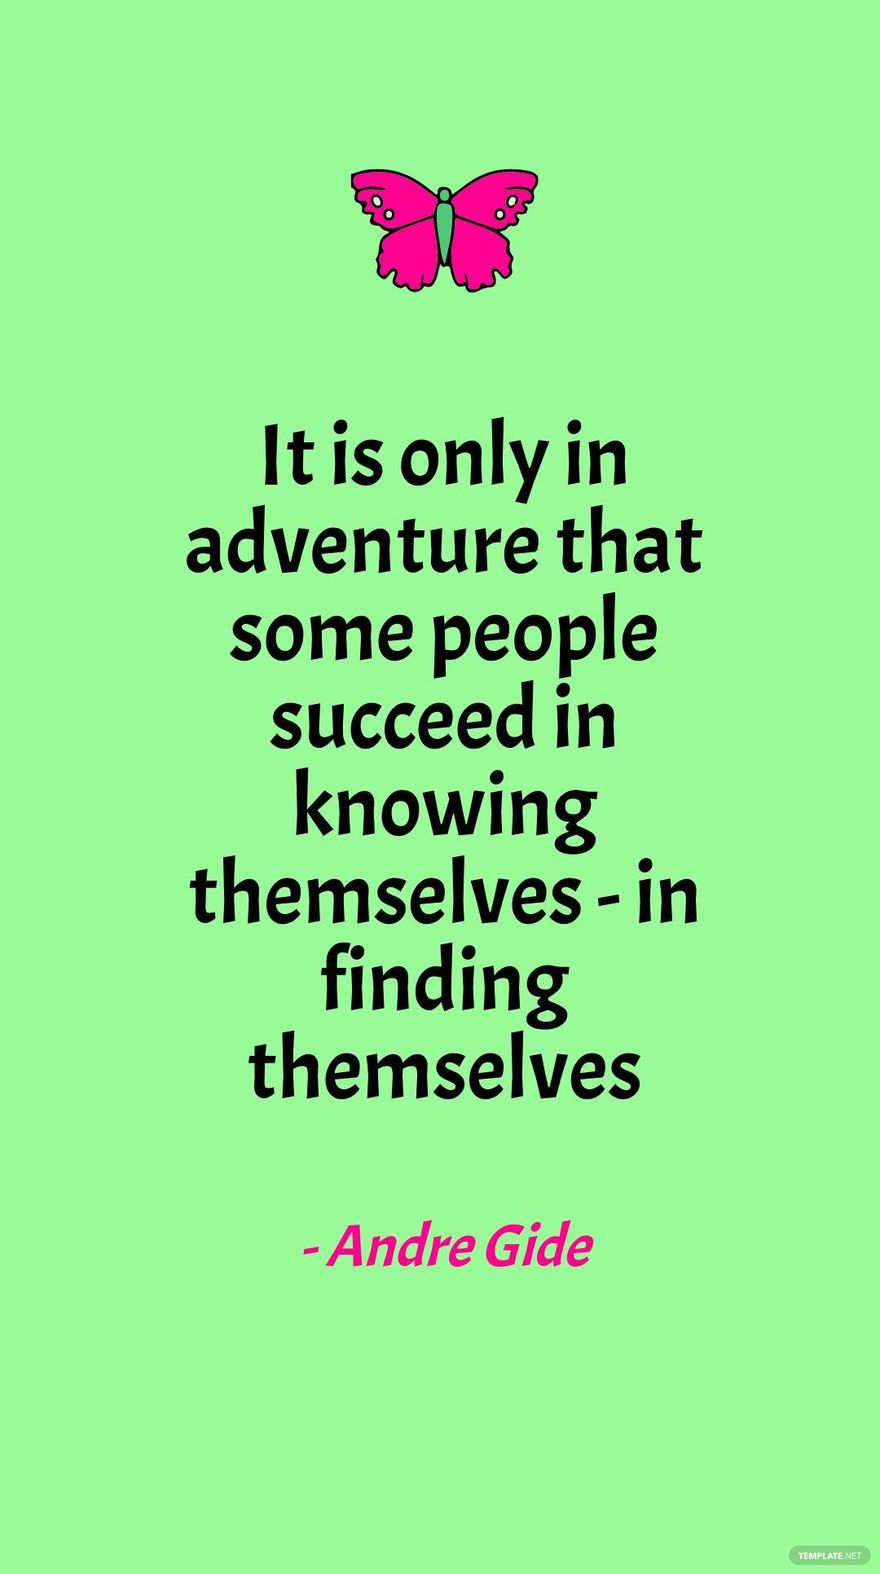 Free Andre Gide - It is only in adventure that some people succeed in knowing themselves - in finding themselves in JPG